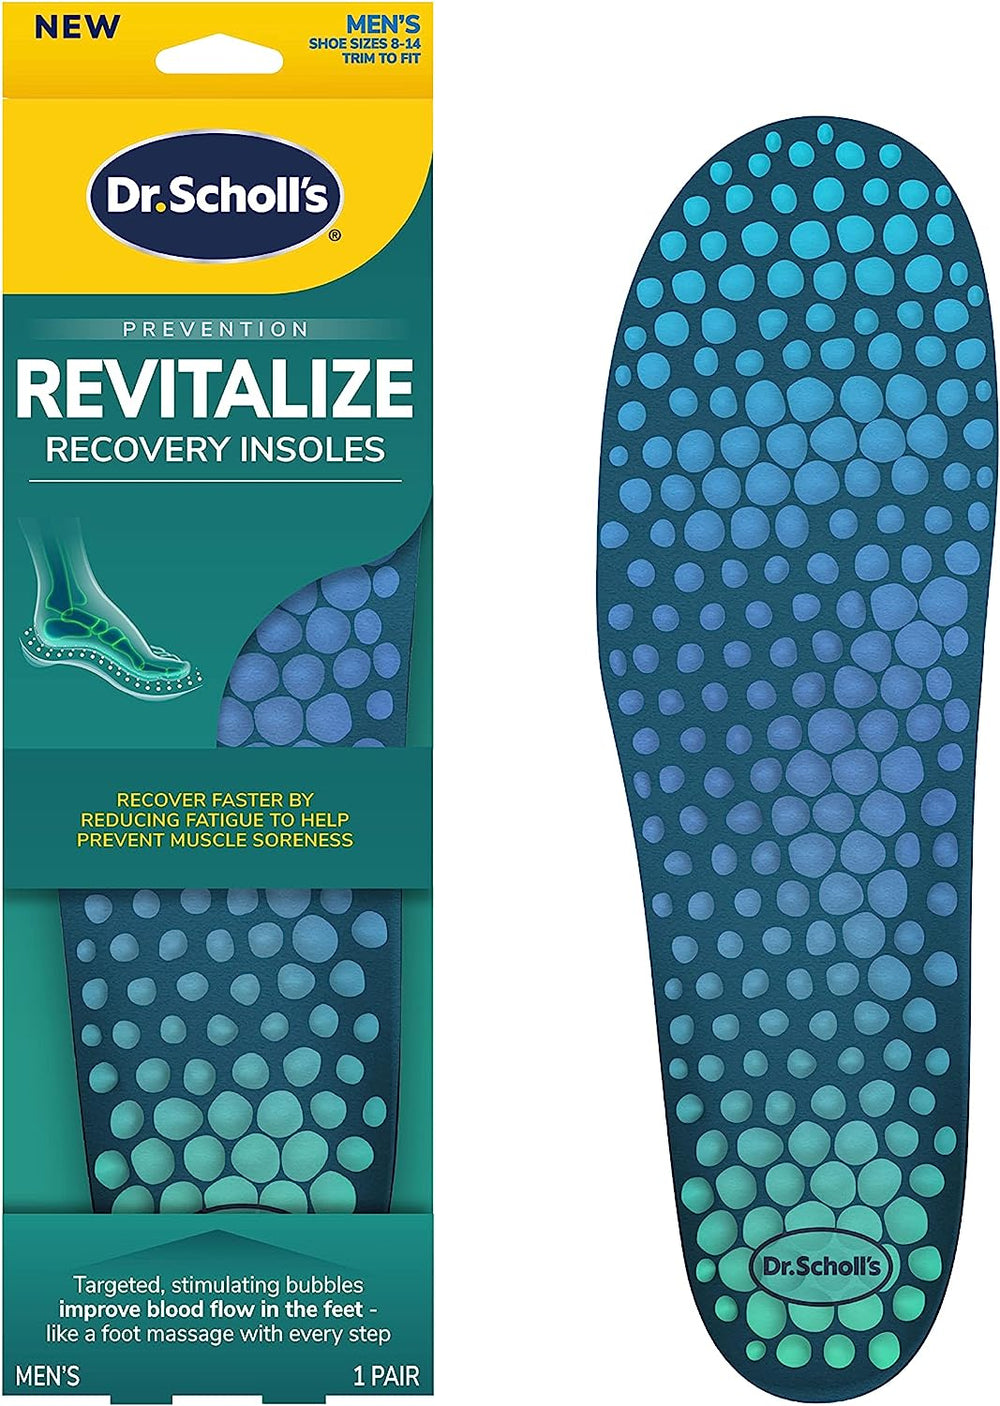 Dr. Scholl's Revitalize Recovery Insoles, 1 Pair Improve Recovery Faster by Reducing Fatigue in Any Shoe, Trim to Fit Inserts - 3alababak